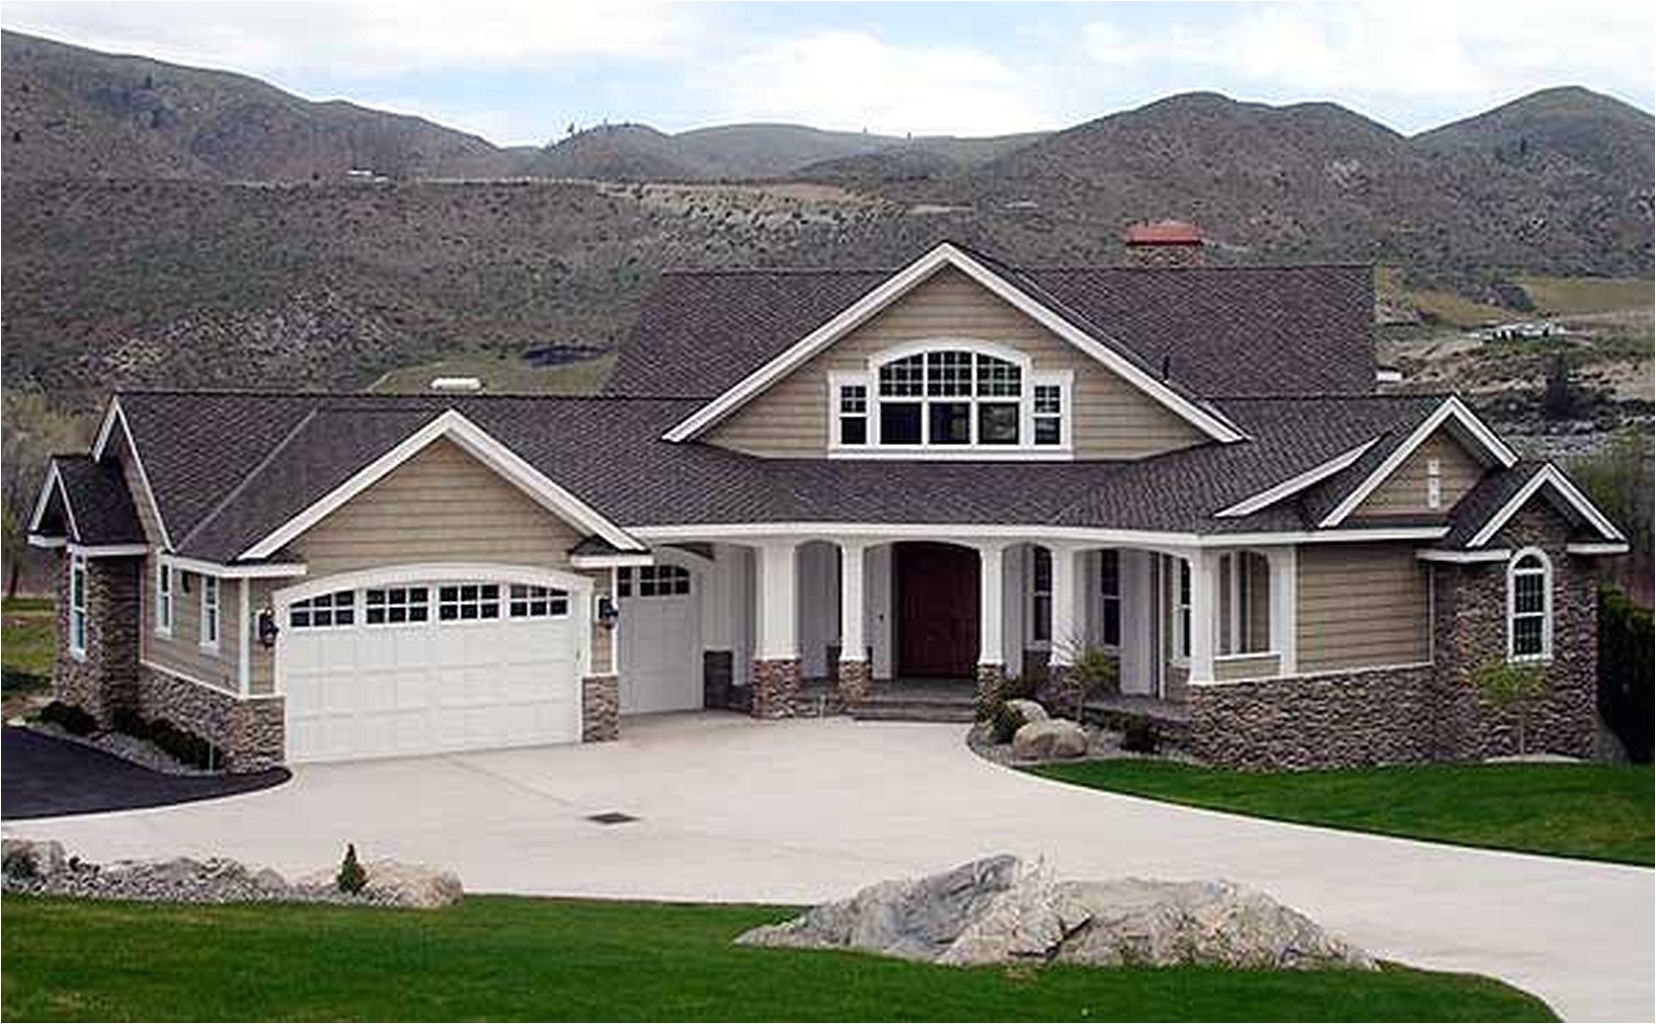 Home Plan Gallery Craftman Style House 16 Photo Gallery Home Design Ideas